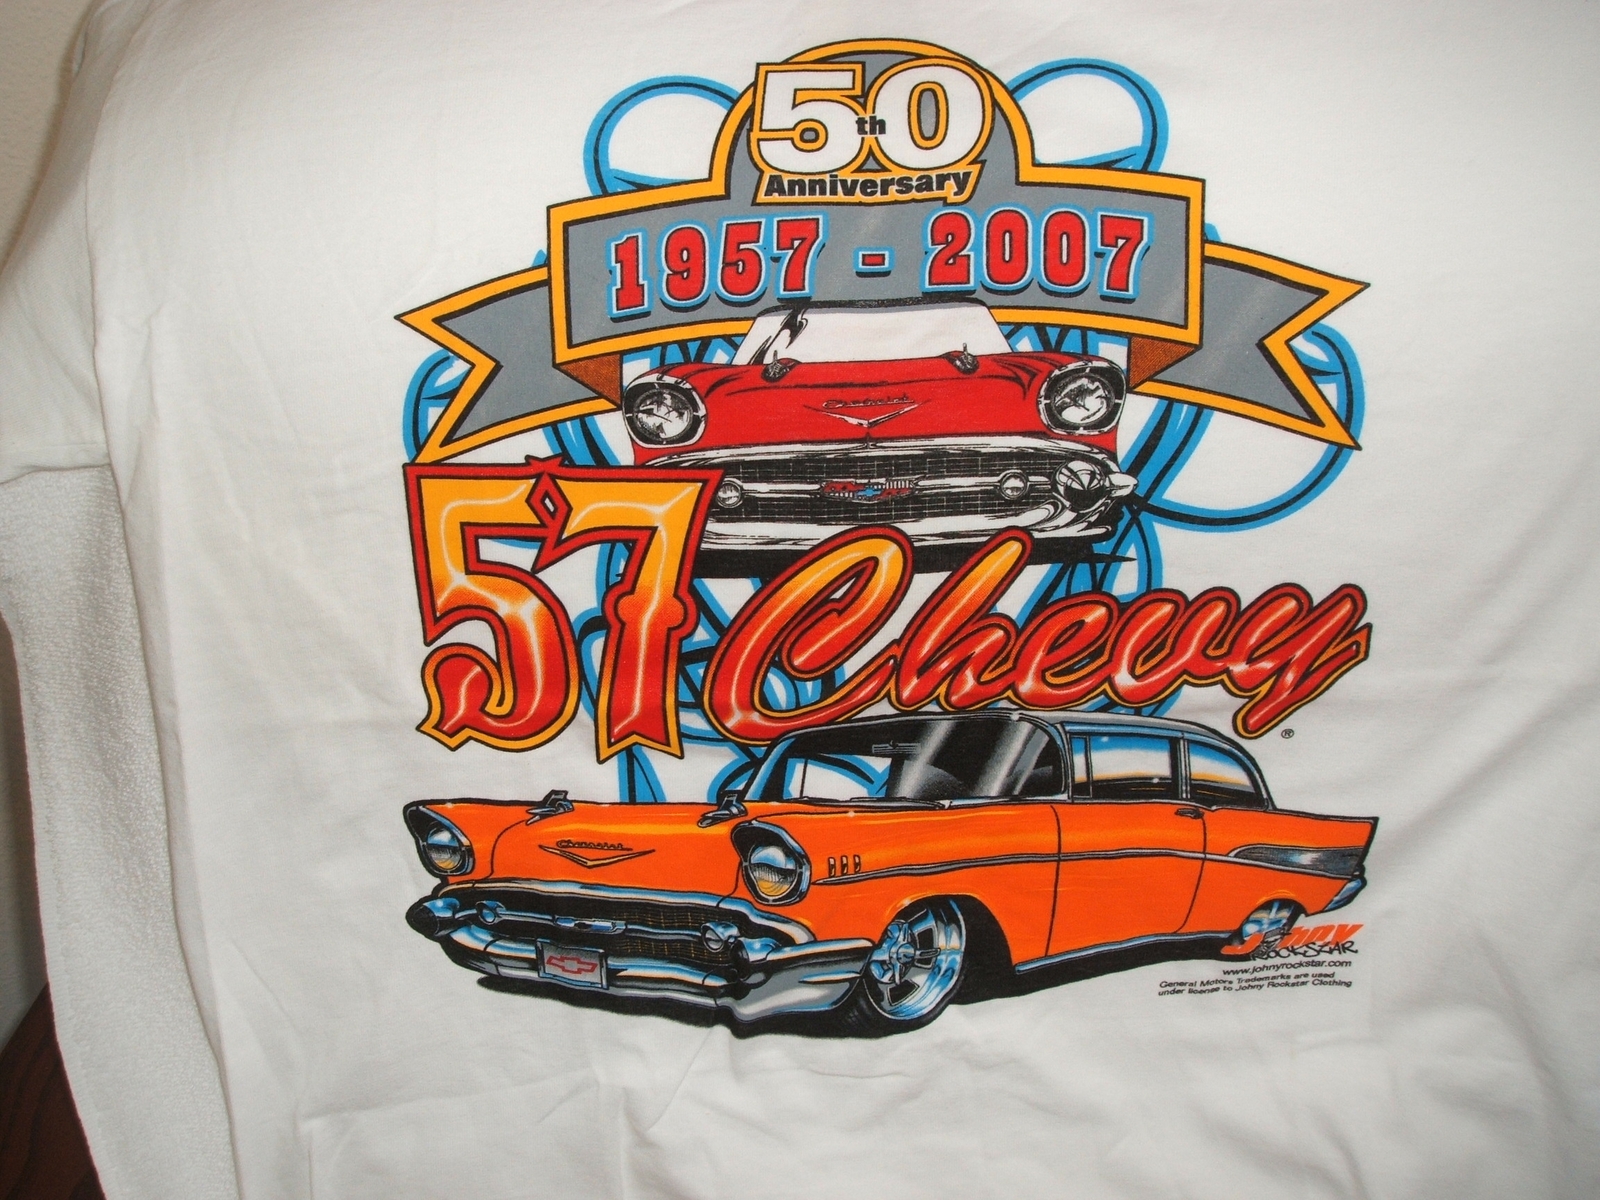 '57 Chevy 50 year Anniversary classic car extra large (XL) white tee shirt w/tag - $24.00